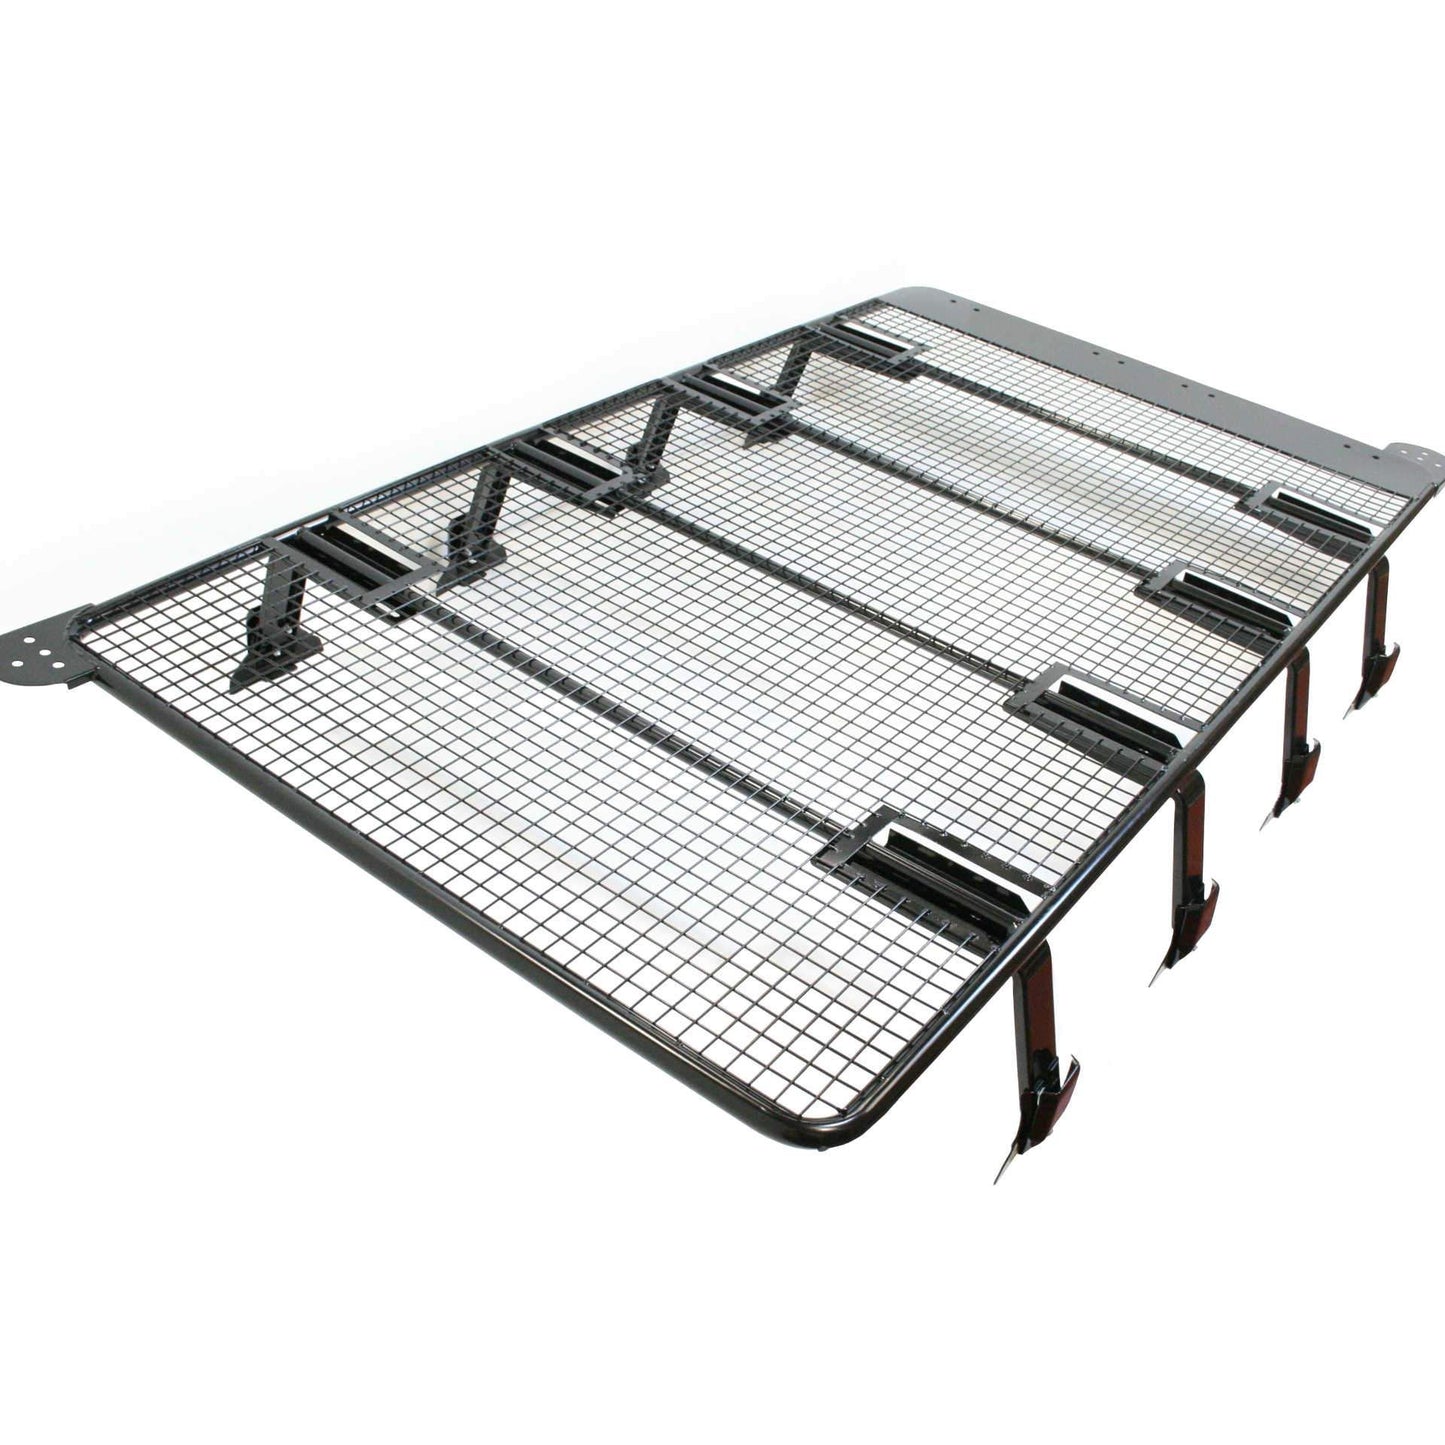 Expedition Steel Flat Roof Rack for Mercedes Benz G-Wagen